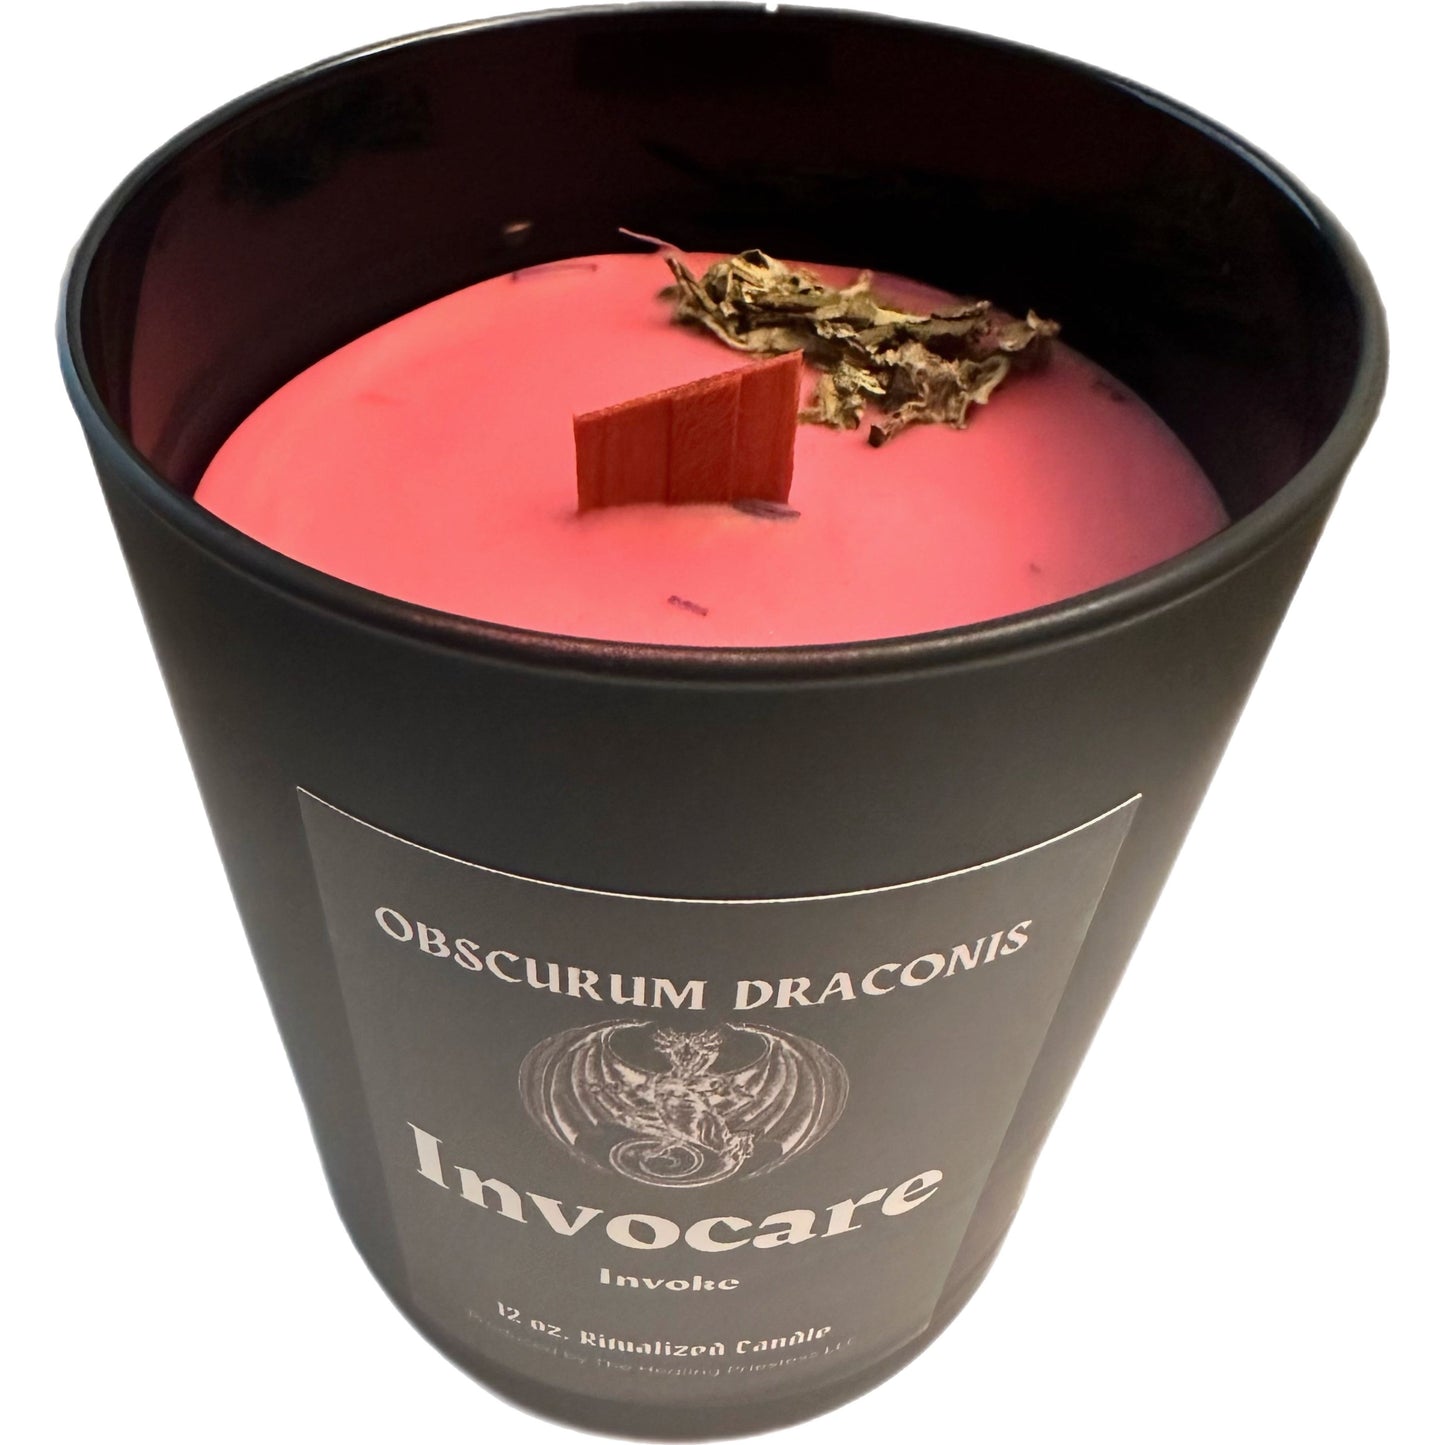 OBSCURUM DRACONIS INVOCARE ( Invoke) CANDLE